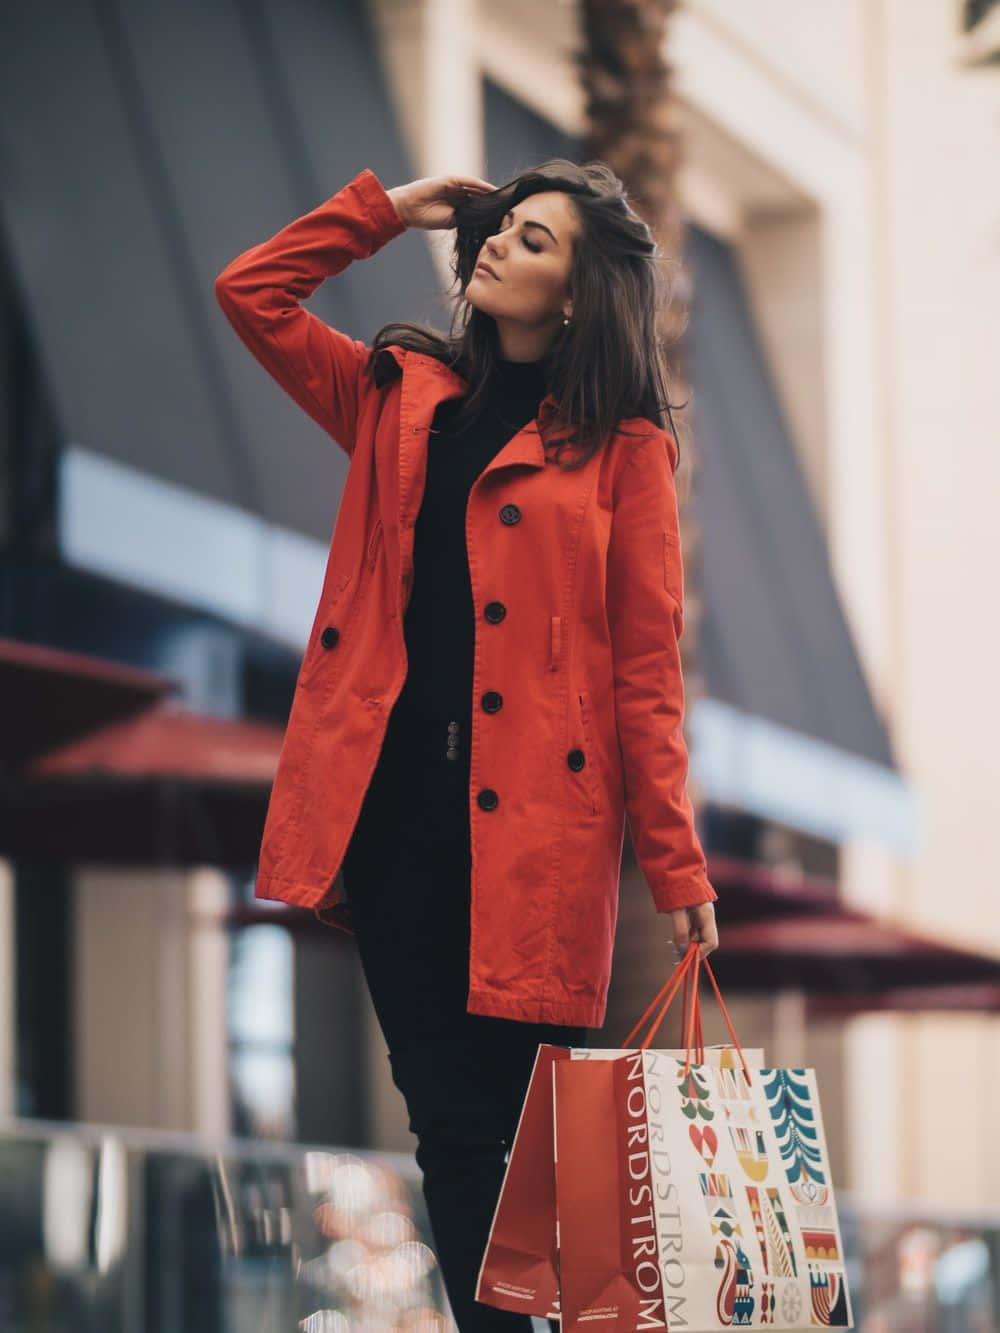 A Woman In A Red Coat Holding Shopping Bags